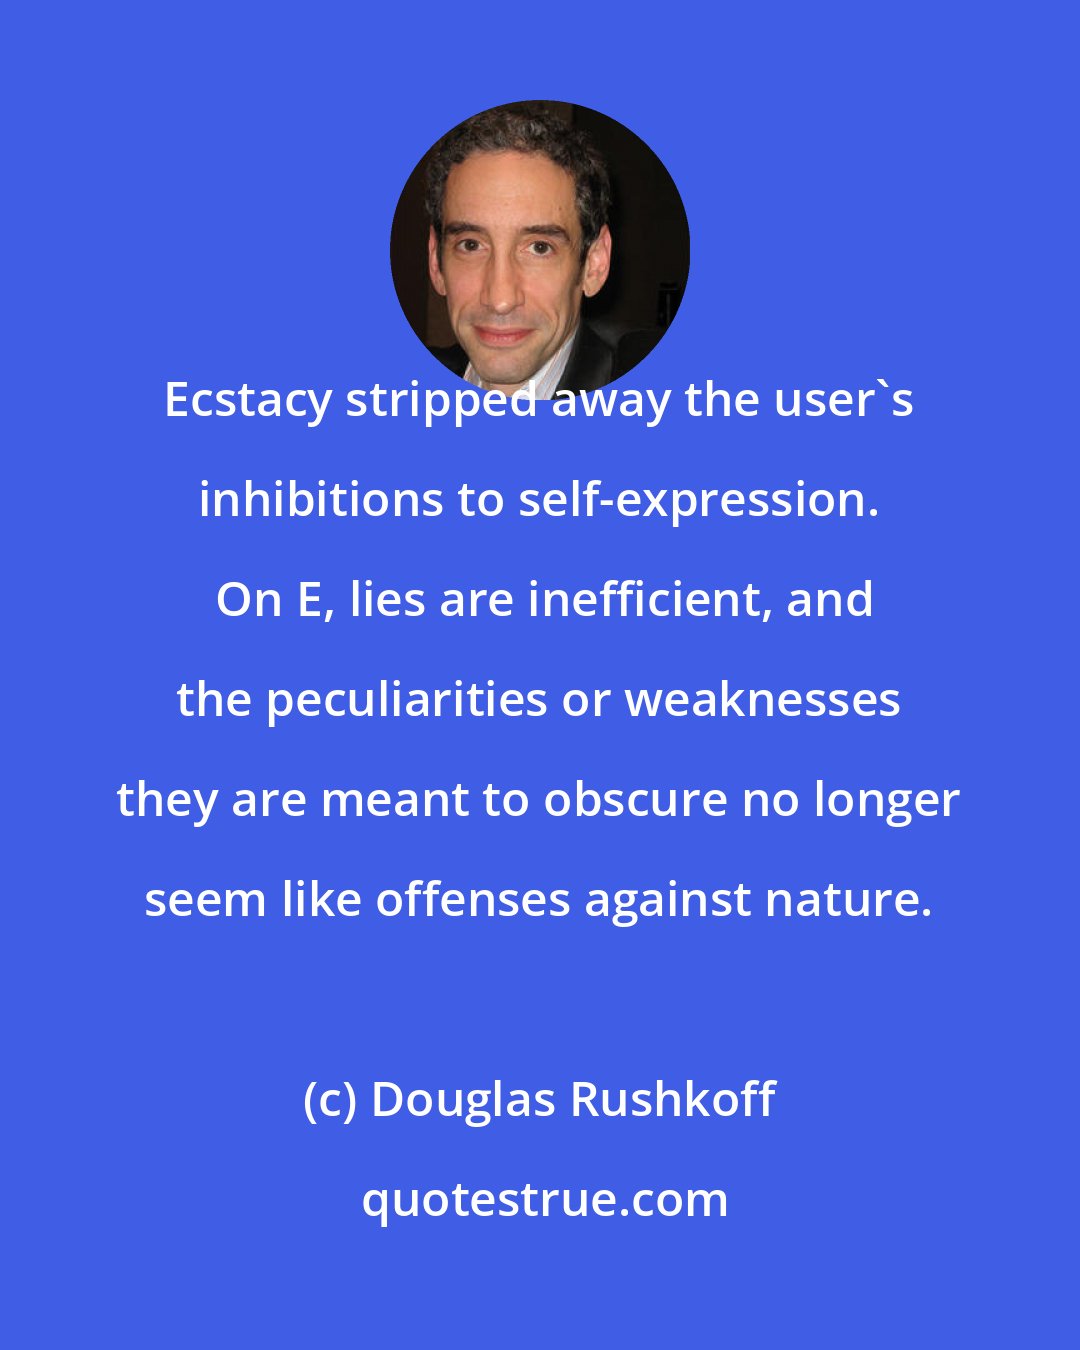 Douglas Rushkoff: Ecstacy stripped away the user's inhibitions to self-expression.  On E, lies are inefficient, and the peculiarities or weaknesses they are meant to obscure no longer seem like offenses against nature.